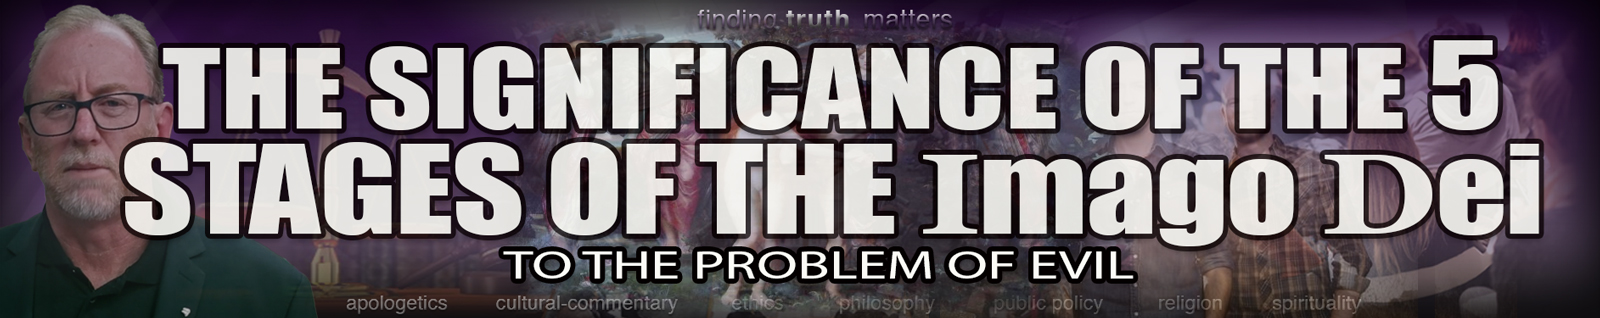 THE SIGNIFICANCE OF THE 5 STAGES OF THE IMAGO DEI TO THE PROBLEM OF EVIL